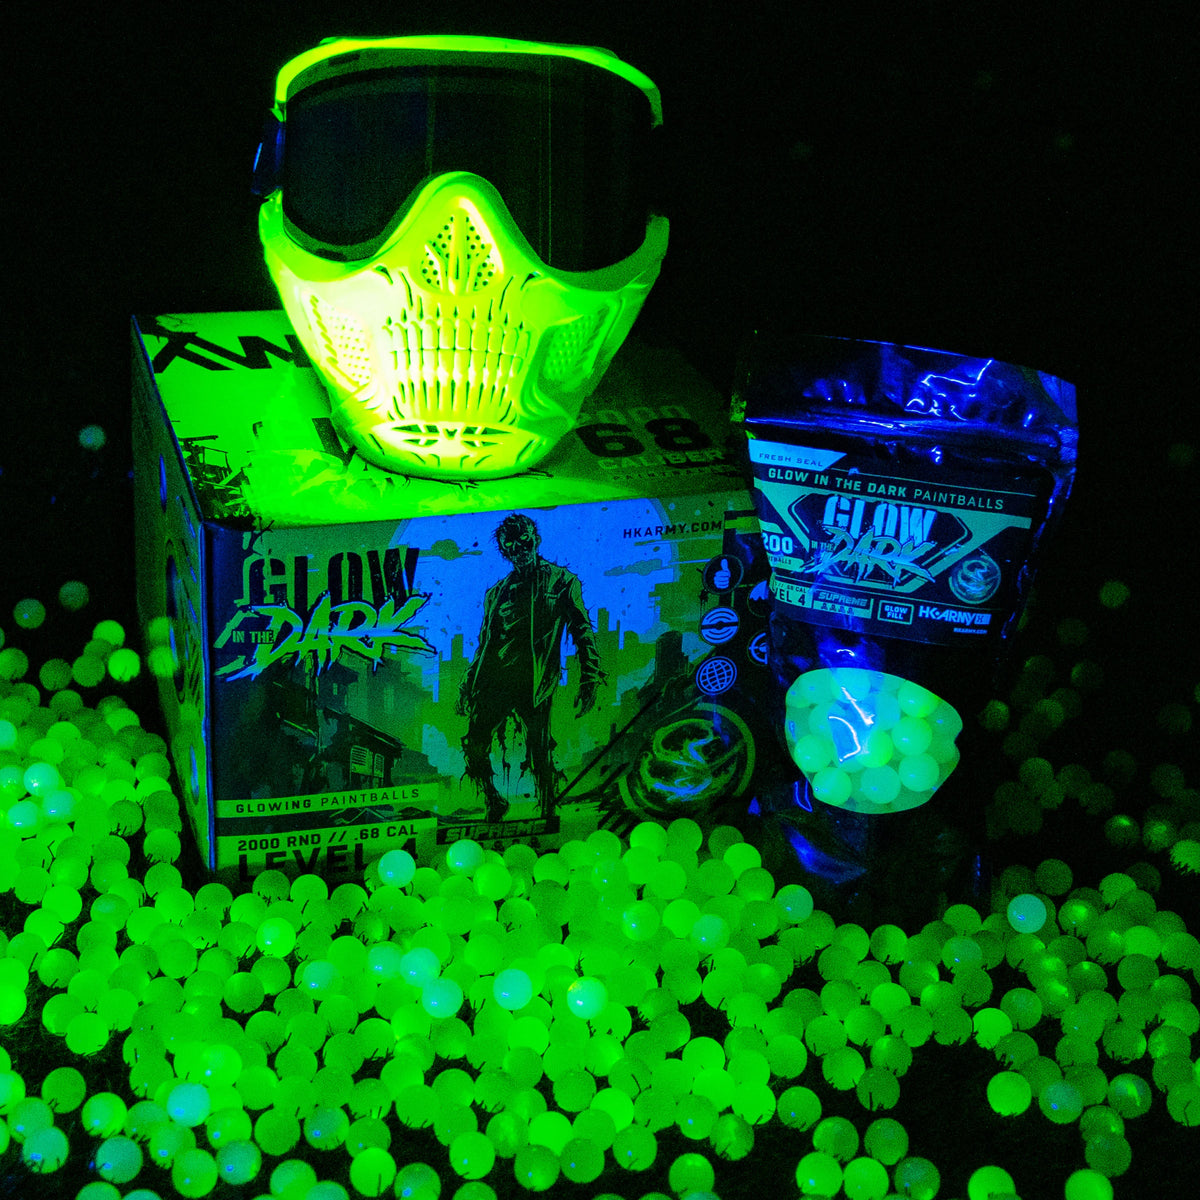 Paintballs | Glow In The Dark Fill | 500 Counts | 0.68 Cal | HK Army